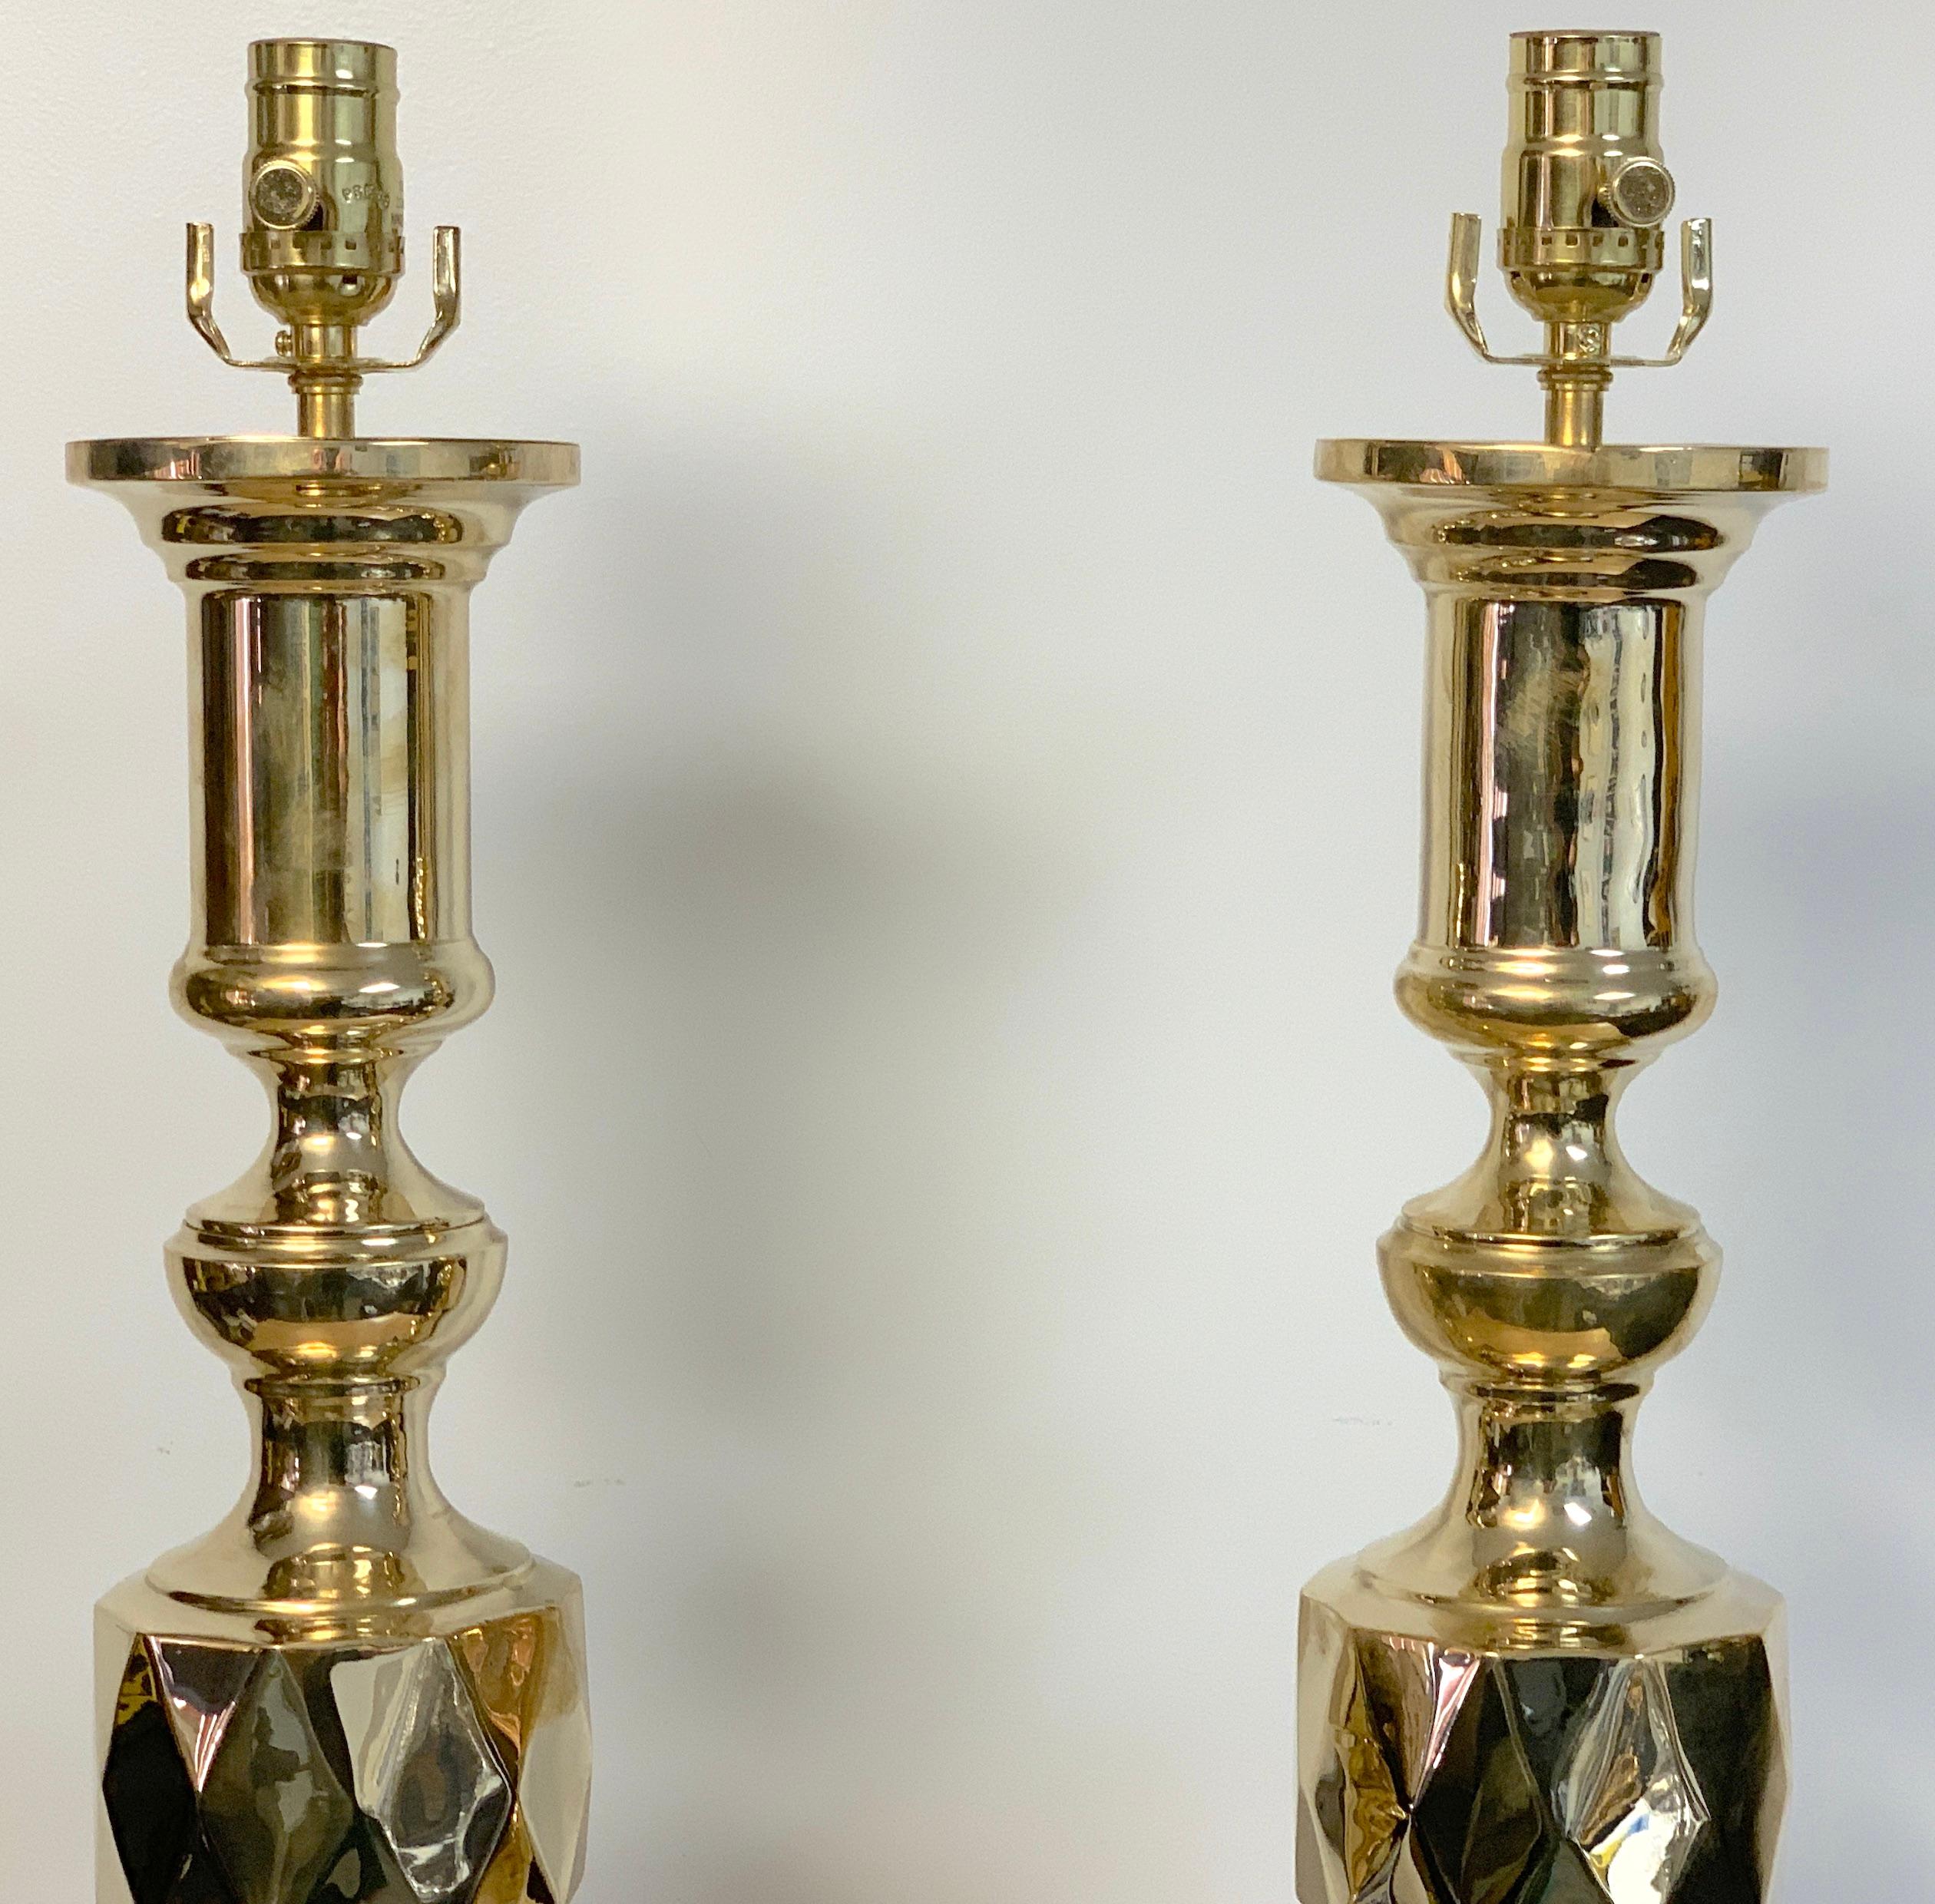 Polished Pair of Monumental 'Ace of Diamonds' Brass Candlestick Lamps For Sale